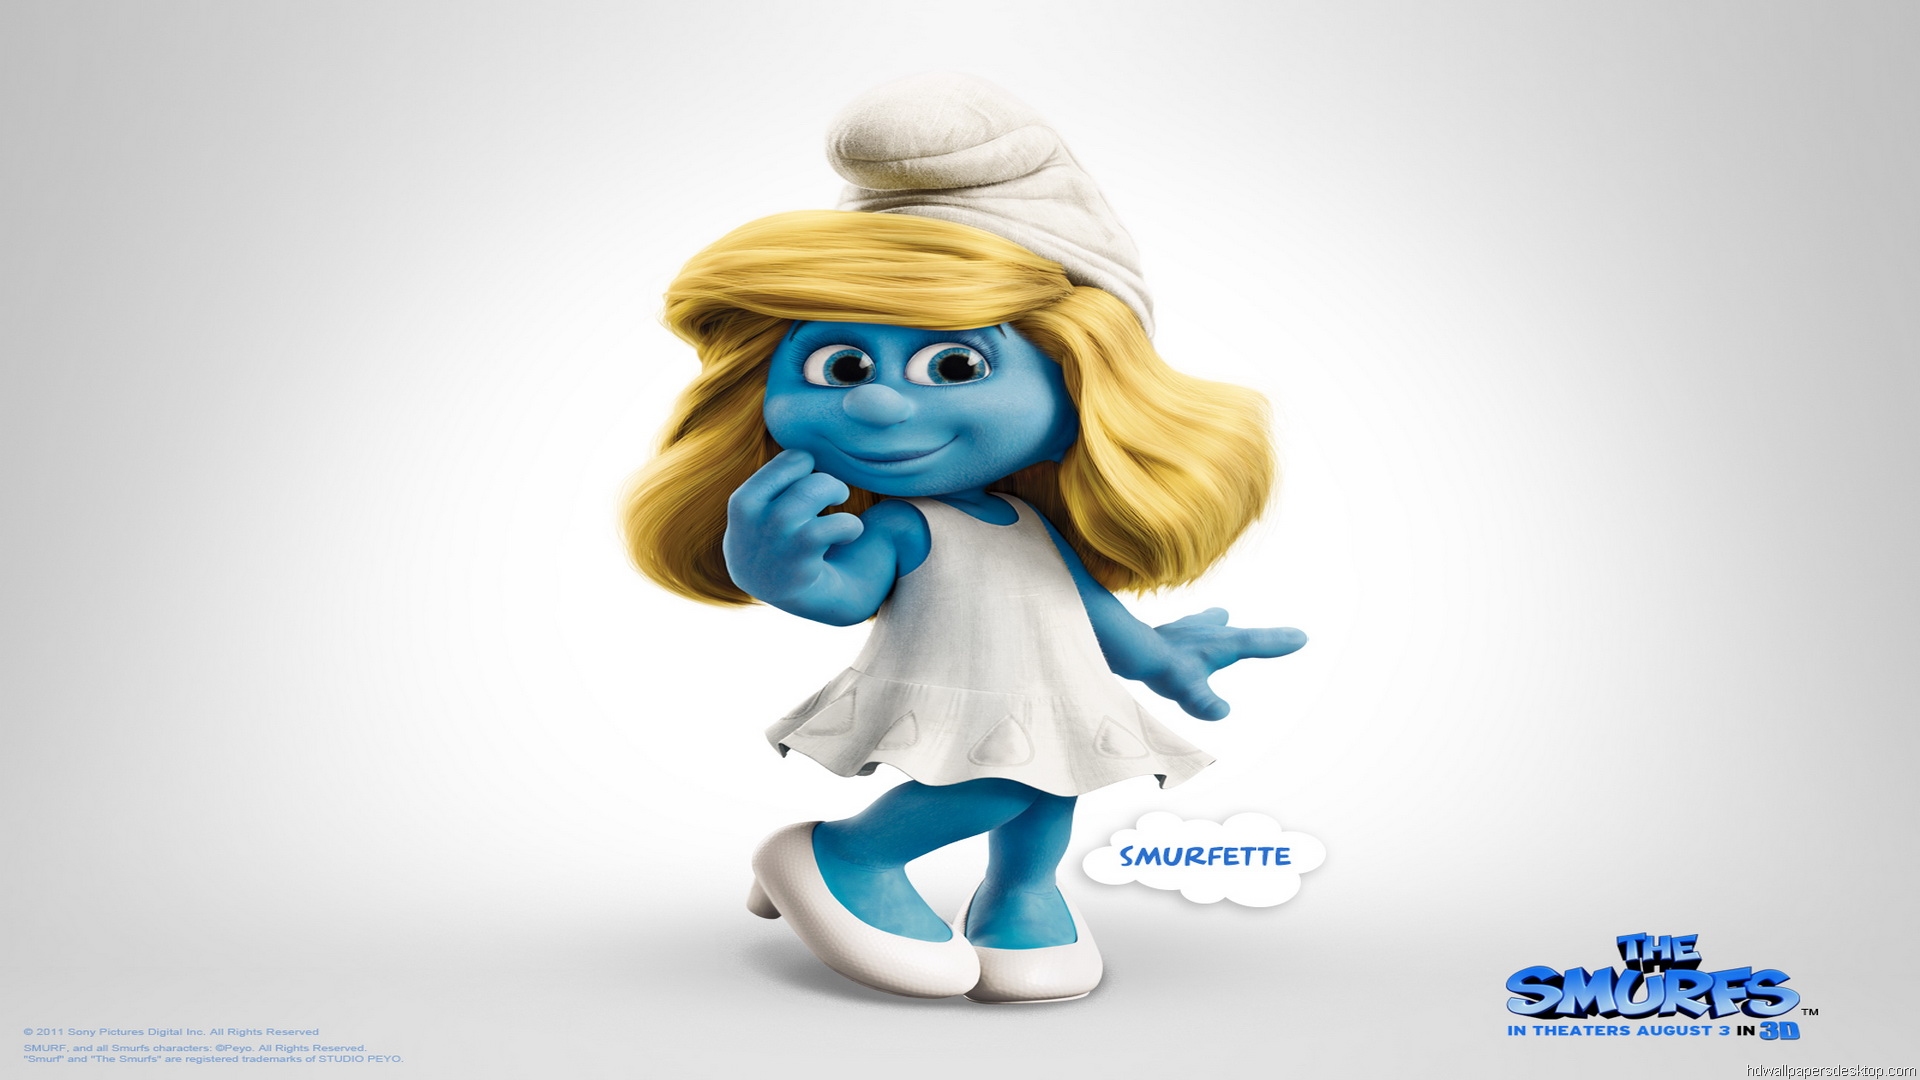 Gallery For Gt Smurfs The